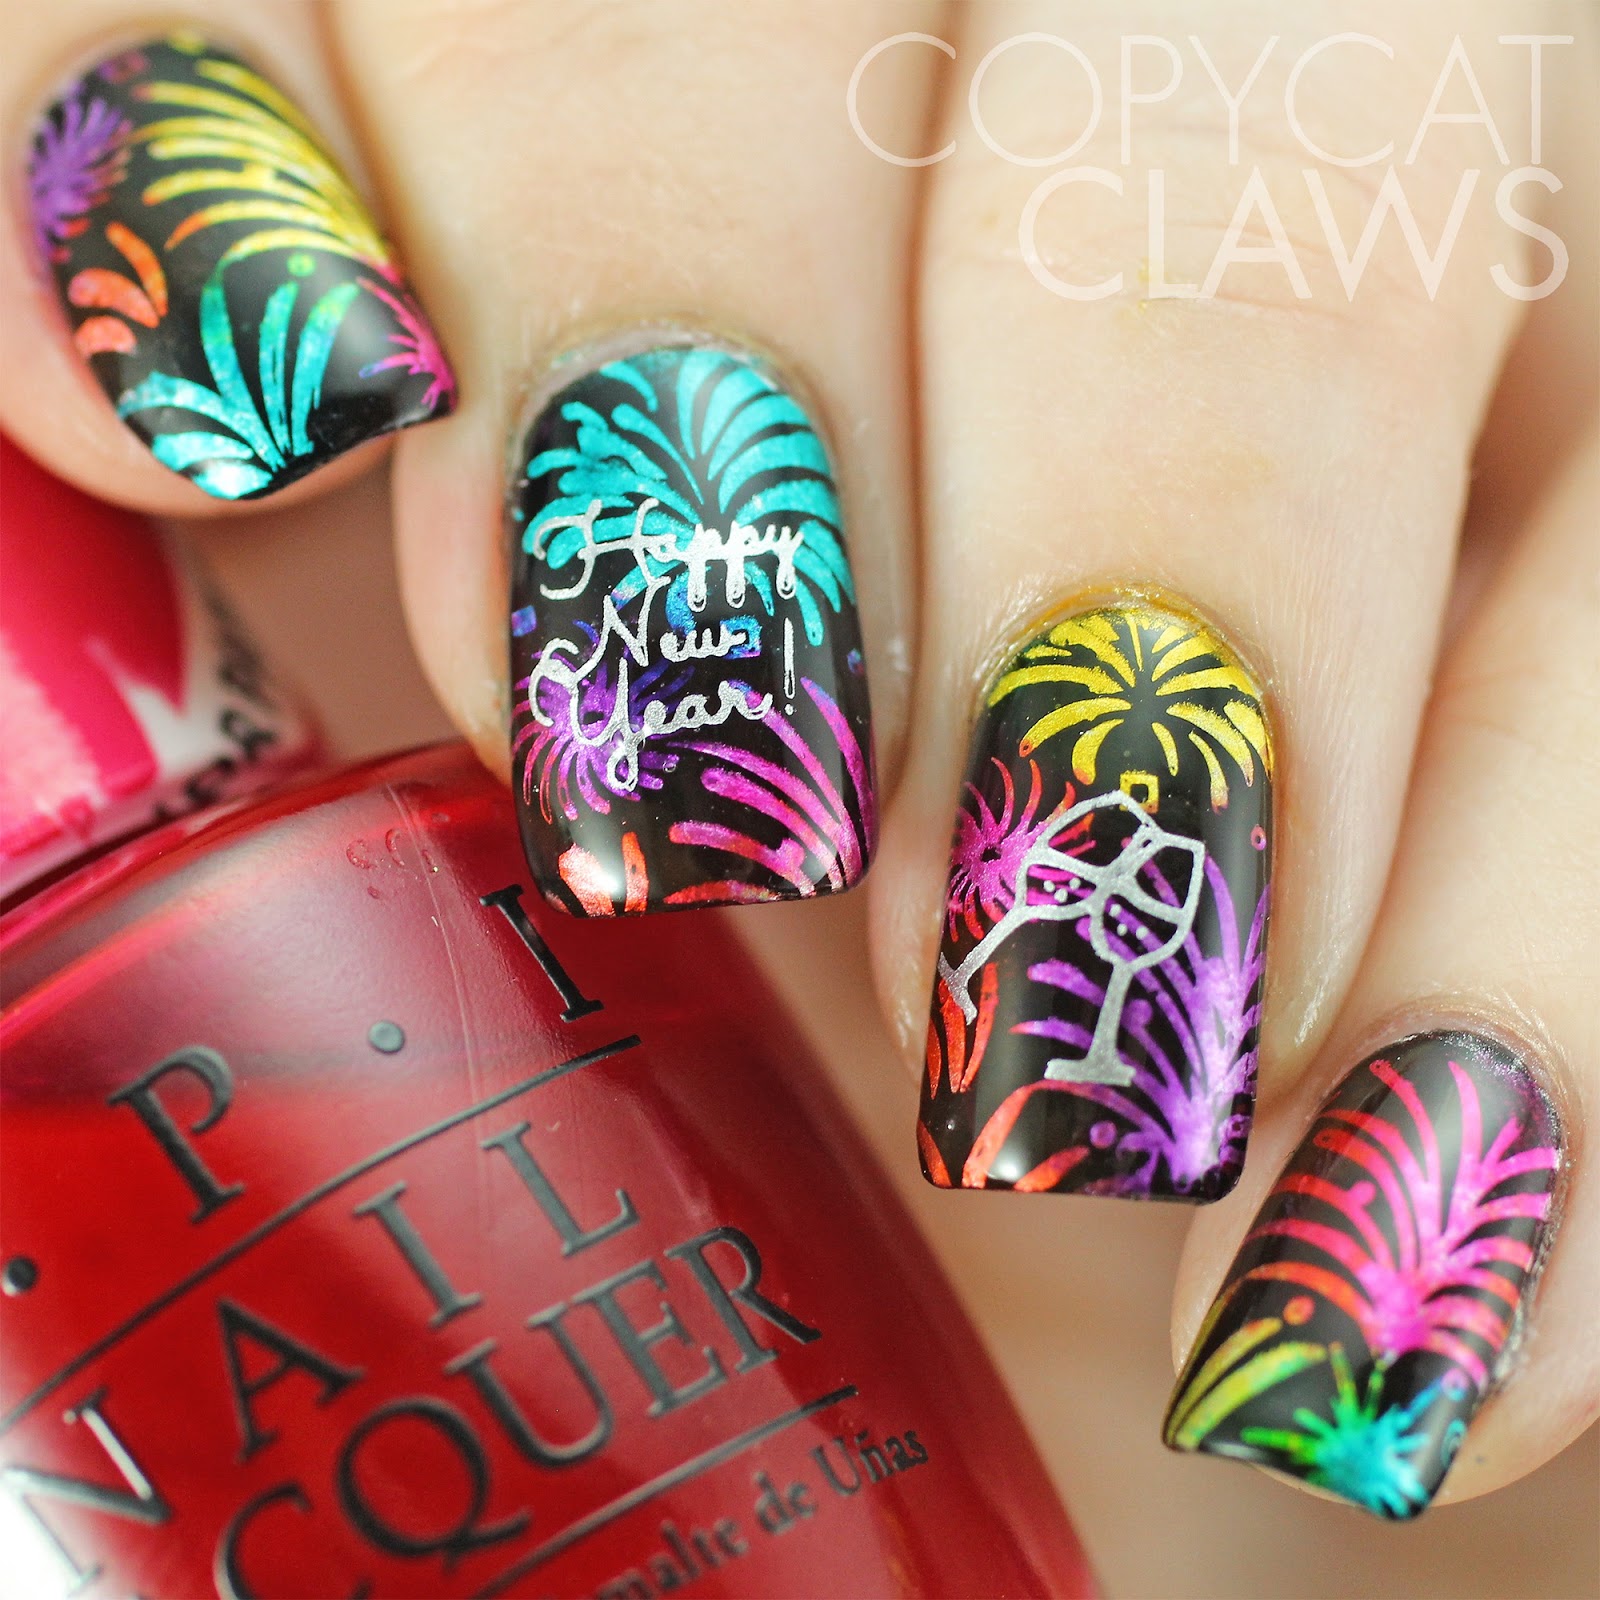 Copycat Claws: 40 Great Nail Art Ideas - New Year